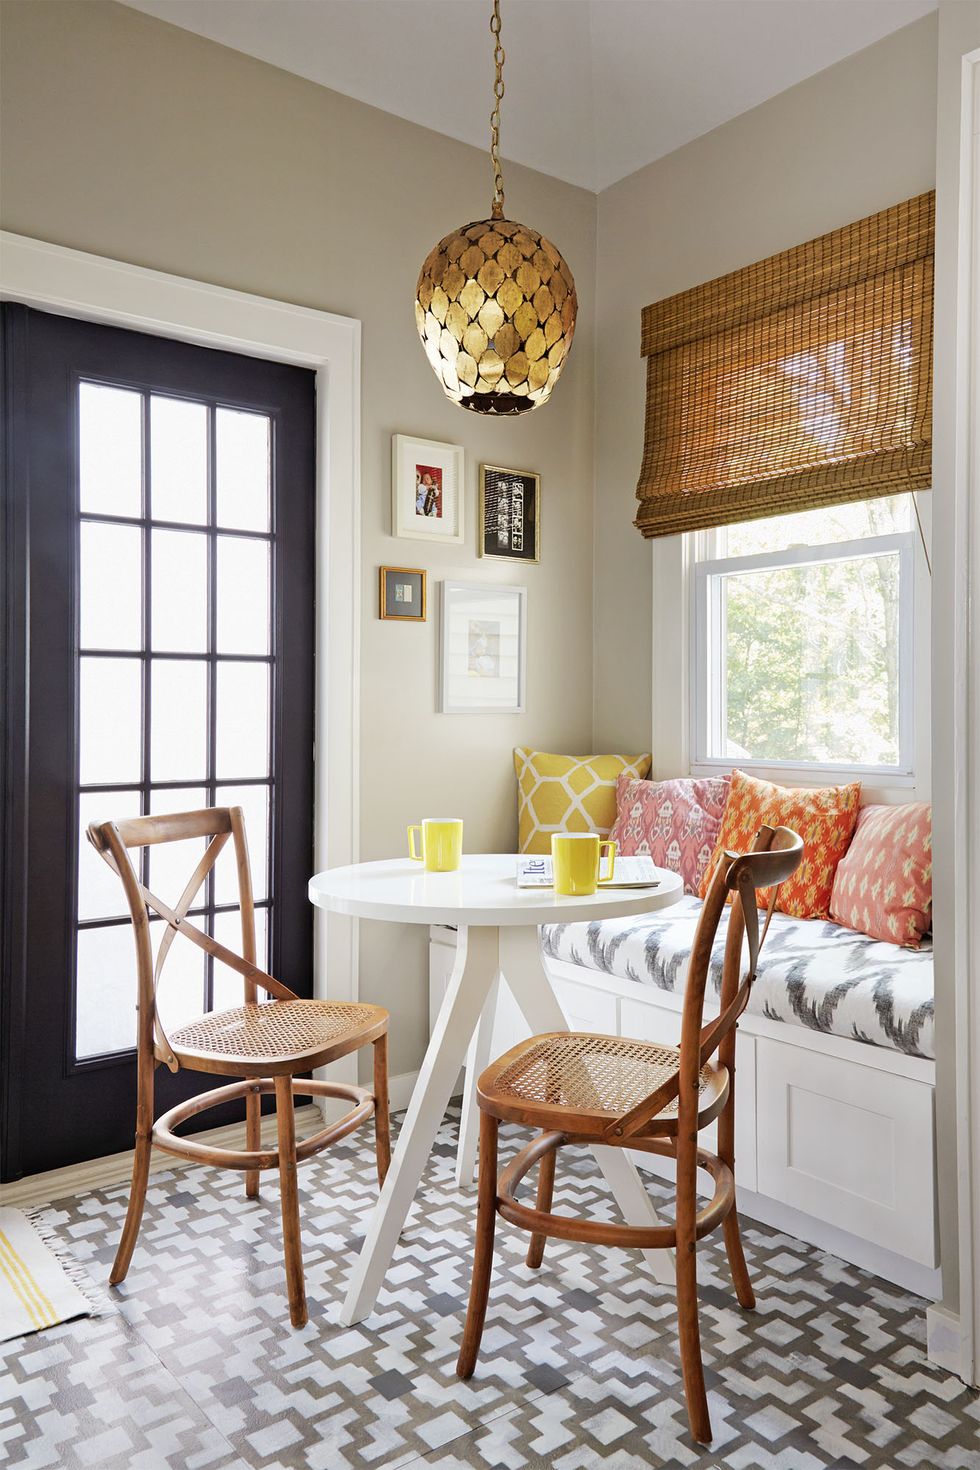 breakfast nook ideas, patterned bench with wicker chairs